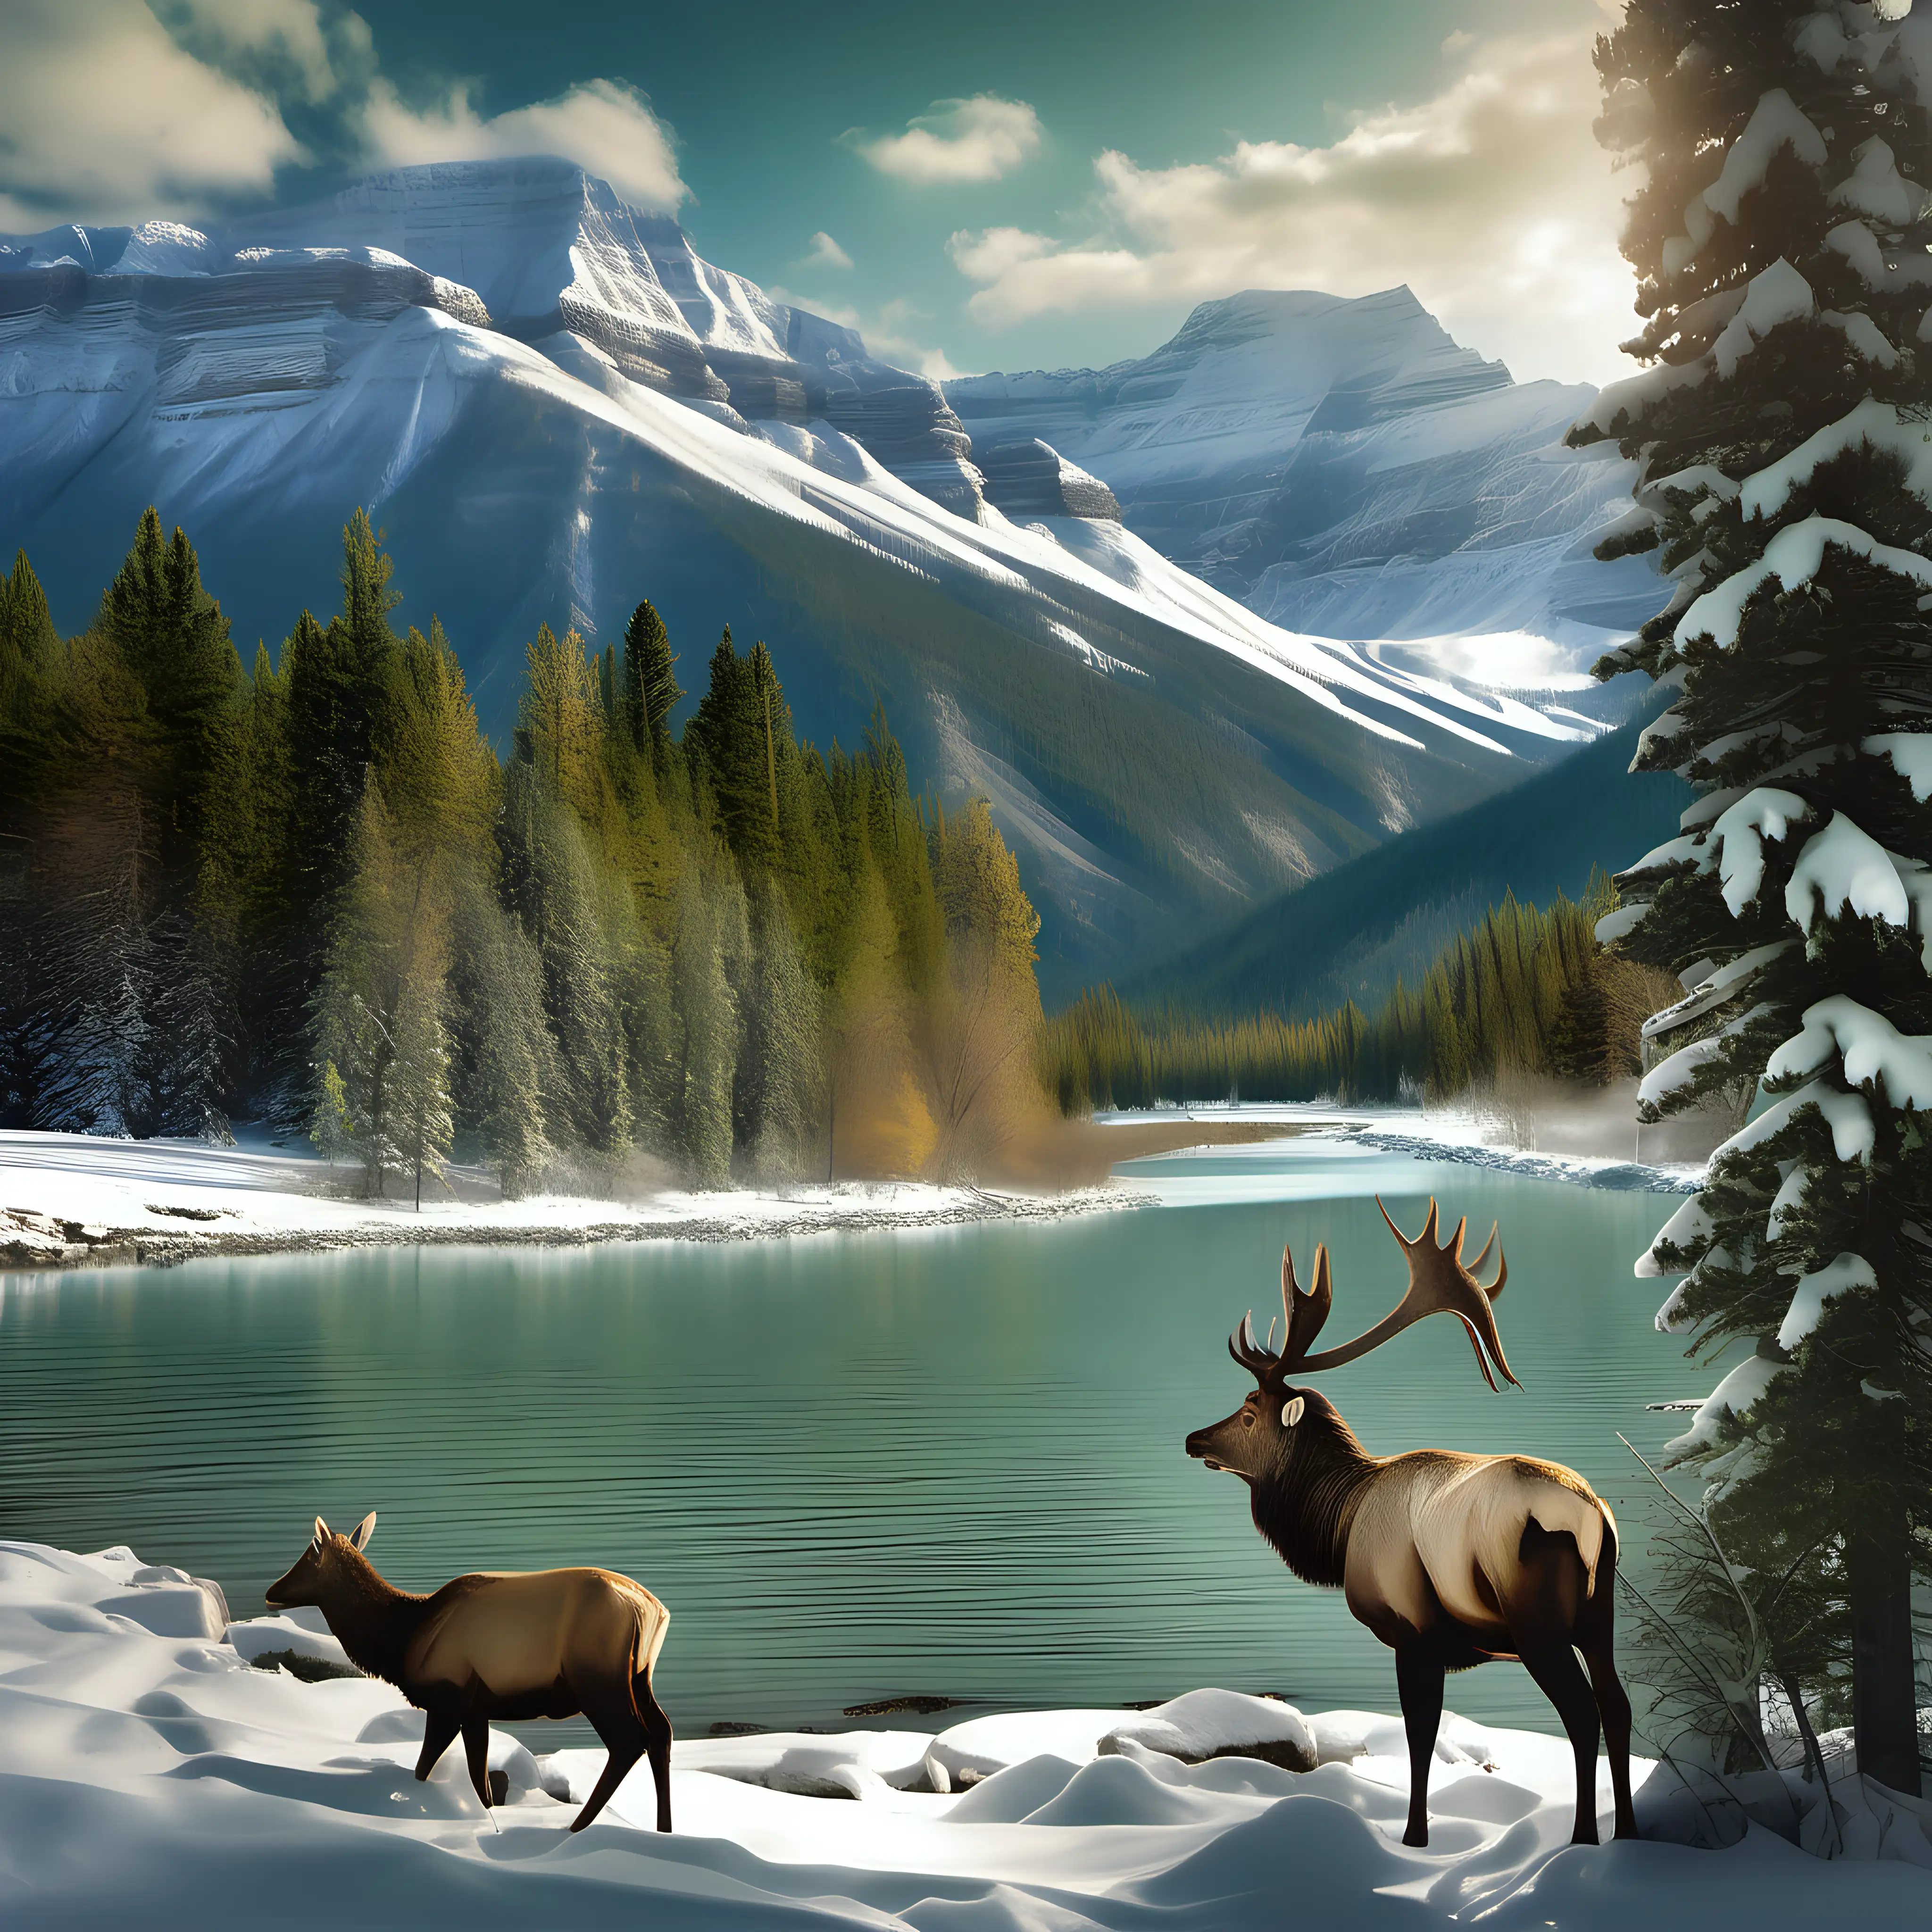 Majestic Banff National Park SnowCapped Peaks and Tranquil River Bliss